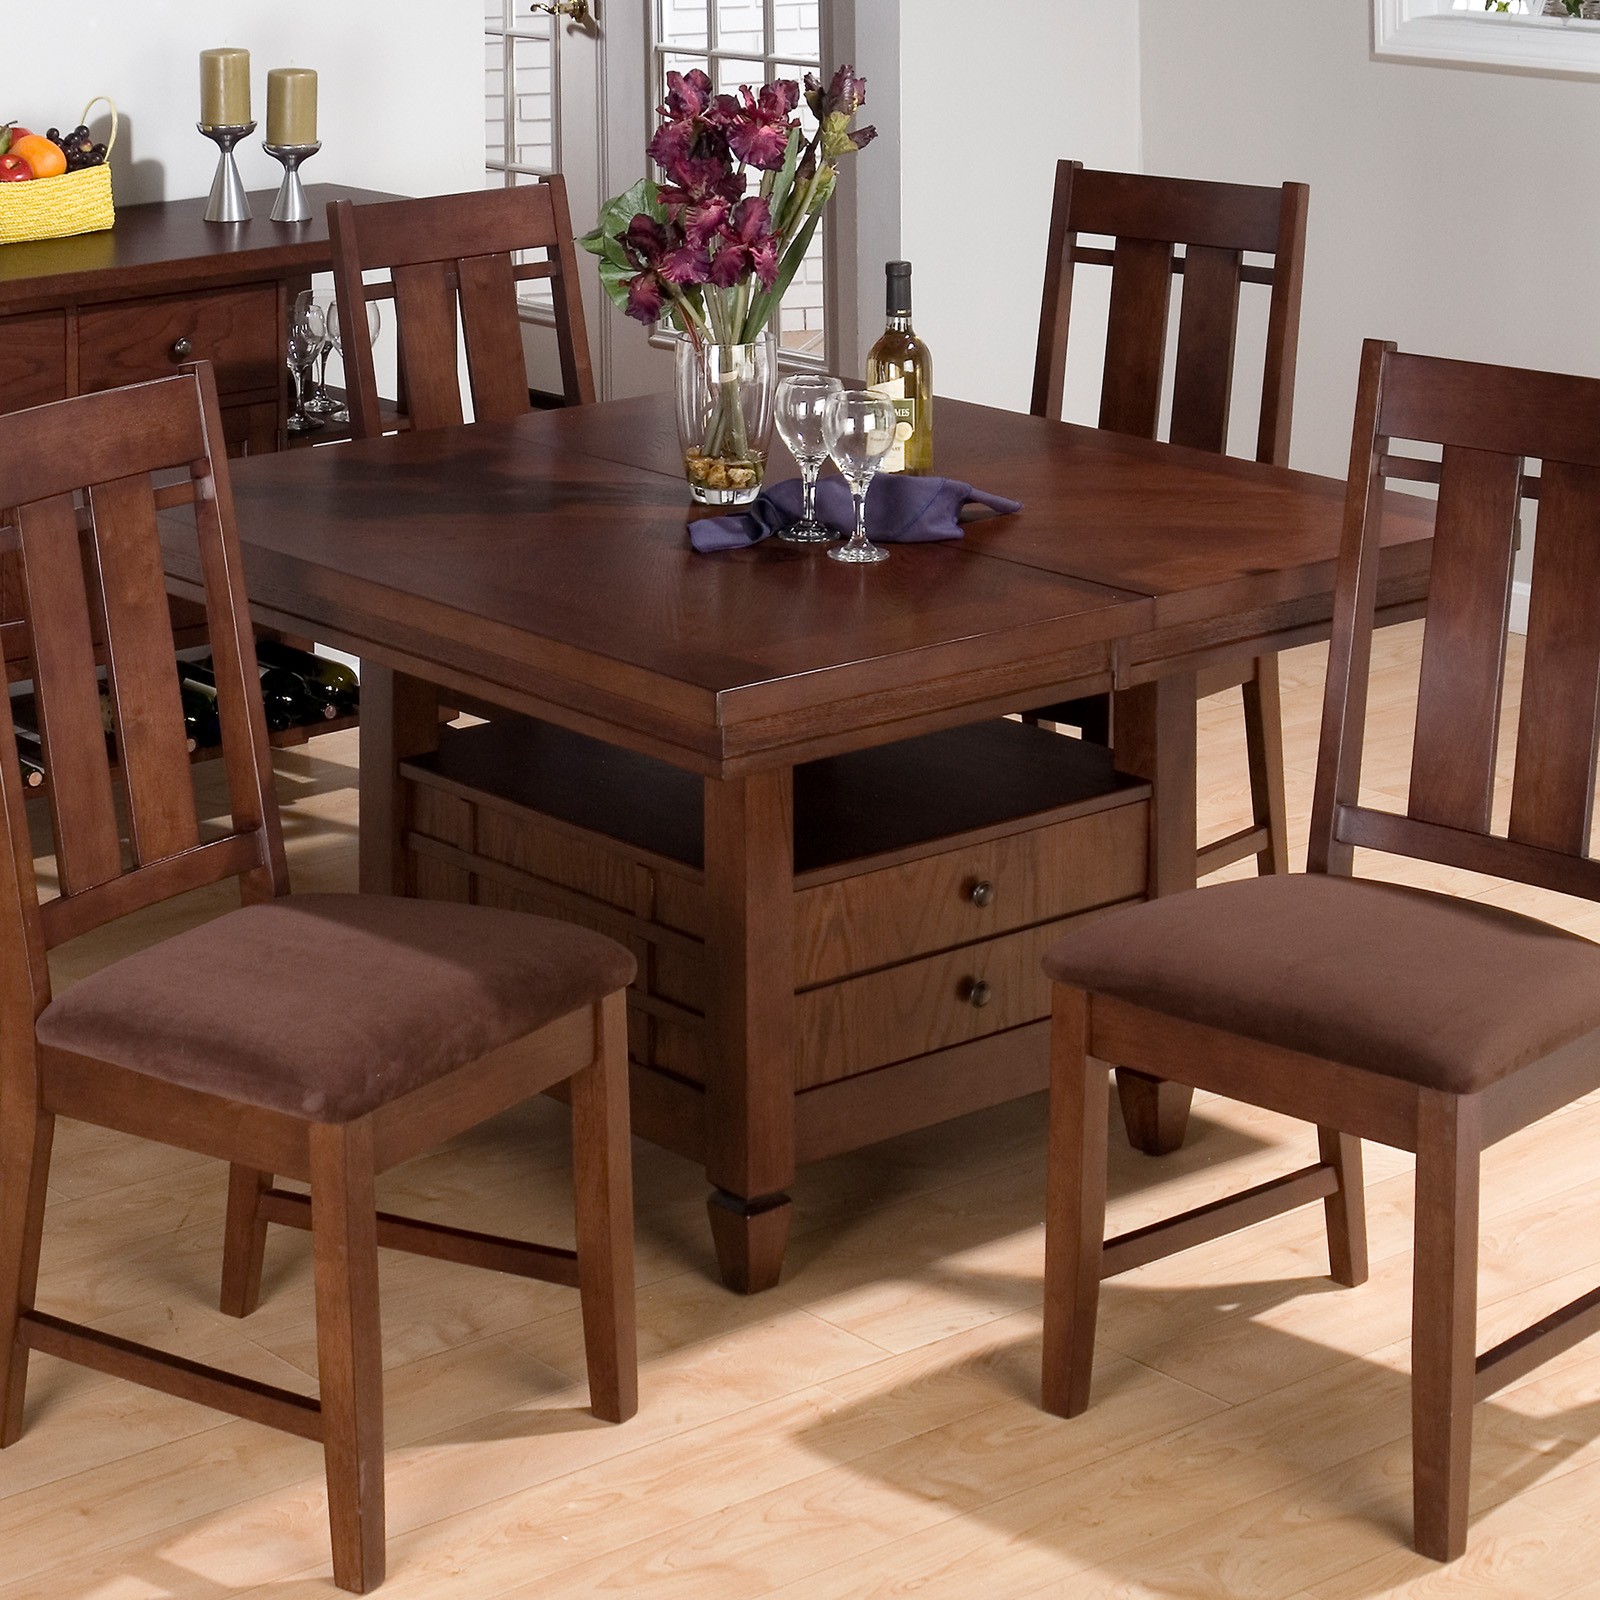 Montville storage dining table at hayneedle